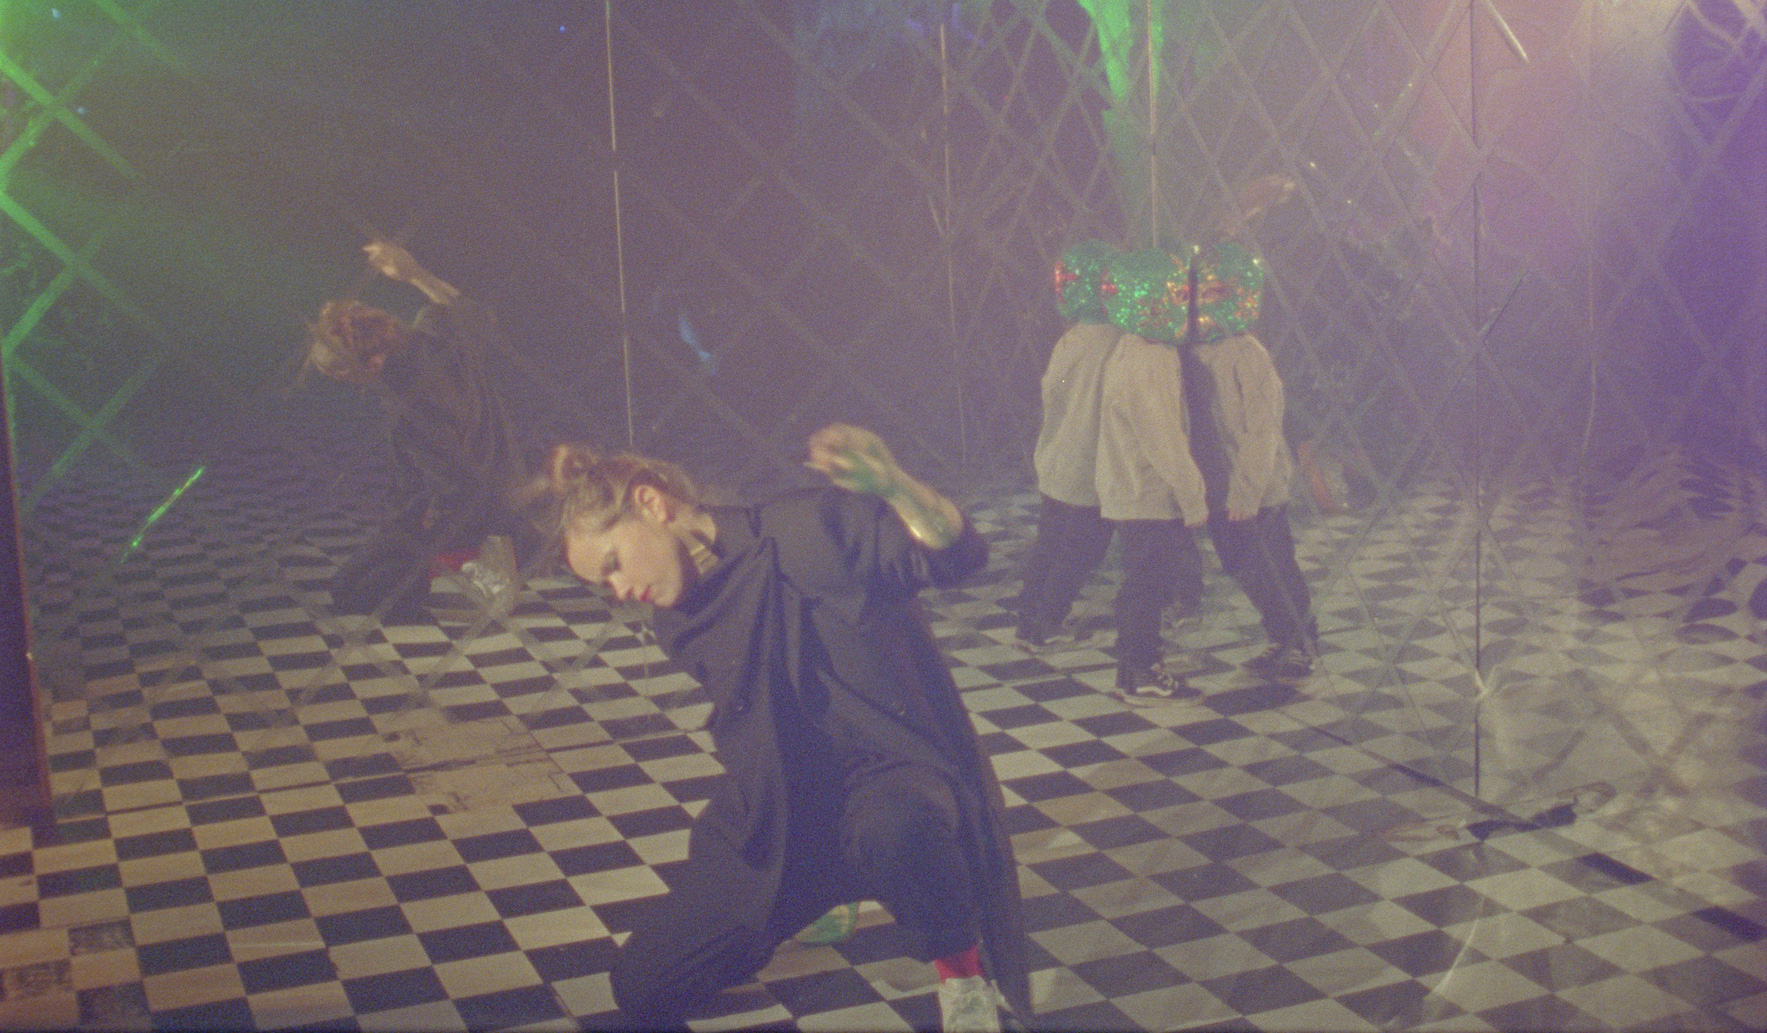 Interior shot of a nightclub with black and white floor, and mirrored walls. A white-skinned woman with blonde hair tied up in a messy top-knot appears to breakdance on the floor. She is wearing a draped black two-piece, red socks and white sneakers. She wears red lipstick and metal jewellry. In the rear of the room, a small child pushes his whole body up against the mirror wall. He is wearing an oversize green sequined Lucha libre mask, a grey sweater, black trousers and dark sneakers. A disco ball refracts blue, purple and green light all over the dancefloor.